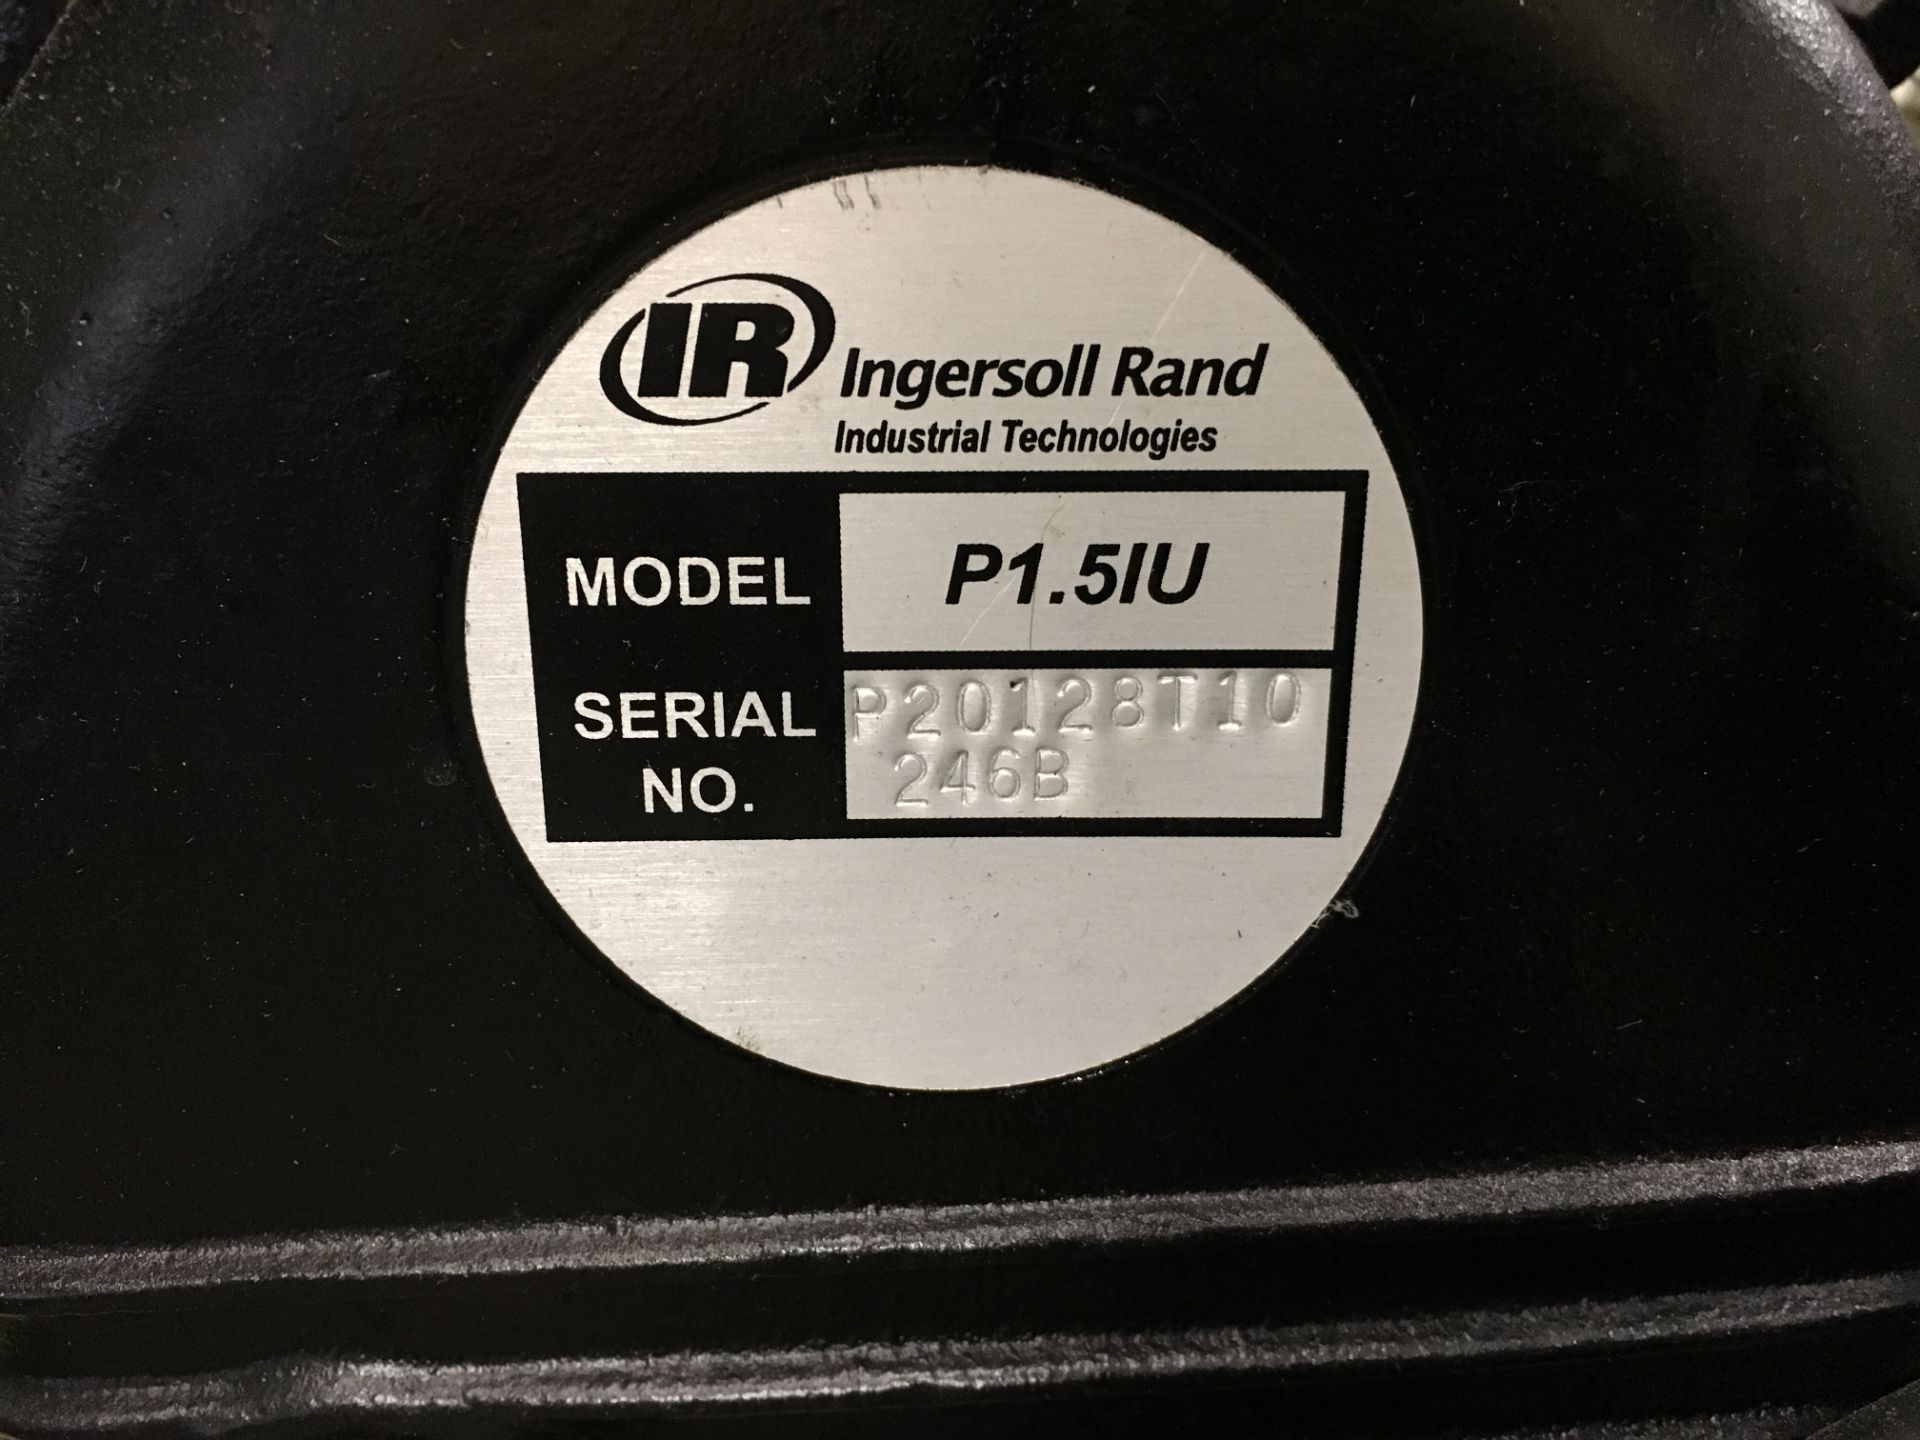 INGERSOLL-RAND #P1-5IU-A9 2 HP AIR COMPRESSOR WITH 20 GALLON TANK, S/N P20128T10246 - Image 2 of 3